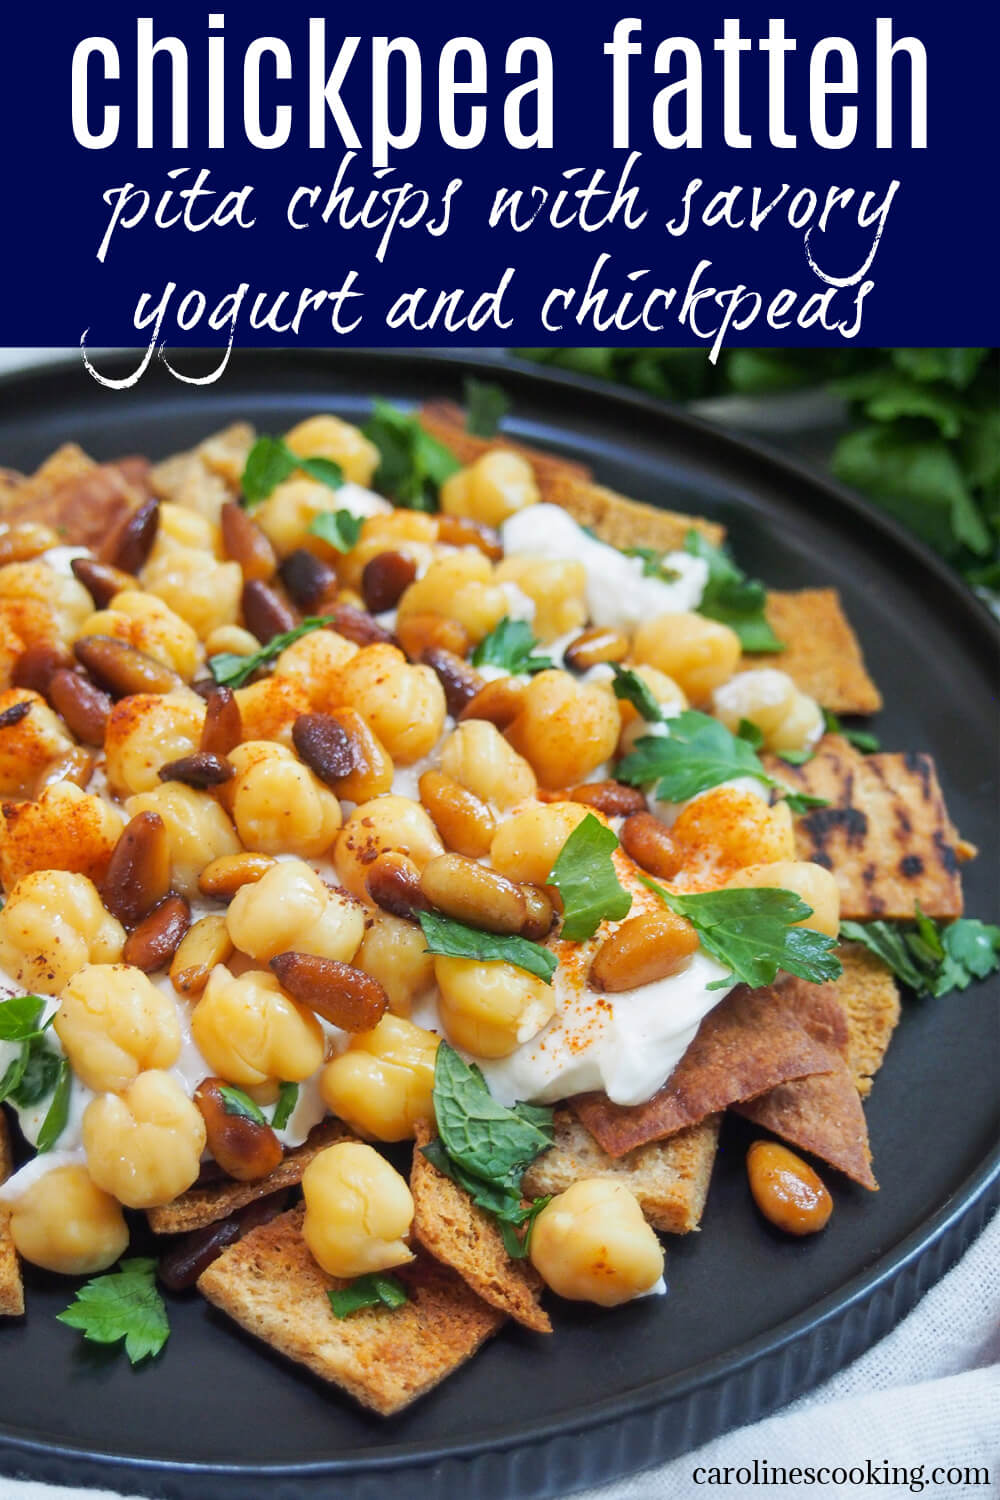 Chickpea fatteh is essentially a way to use up leftover pita, but really it's so much more.  The simple combination of crisp pita chips, savory seasoned yogurt and chickpeas is a delicious mix of flavors and textures.  Great as a snack or light meal (and traditionally breakfast!)